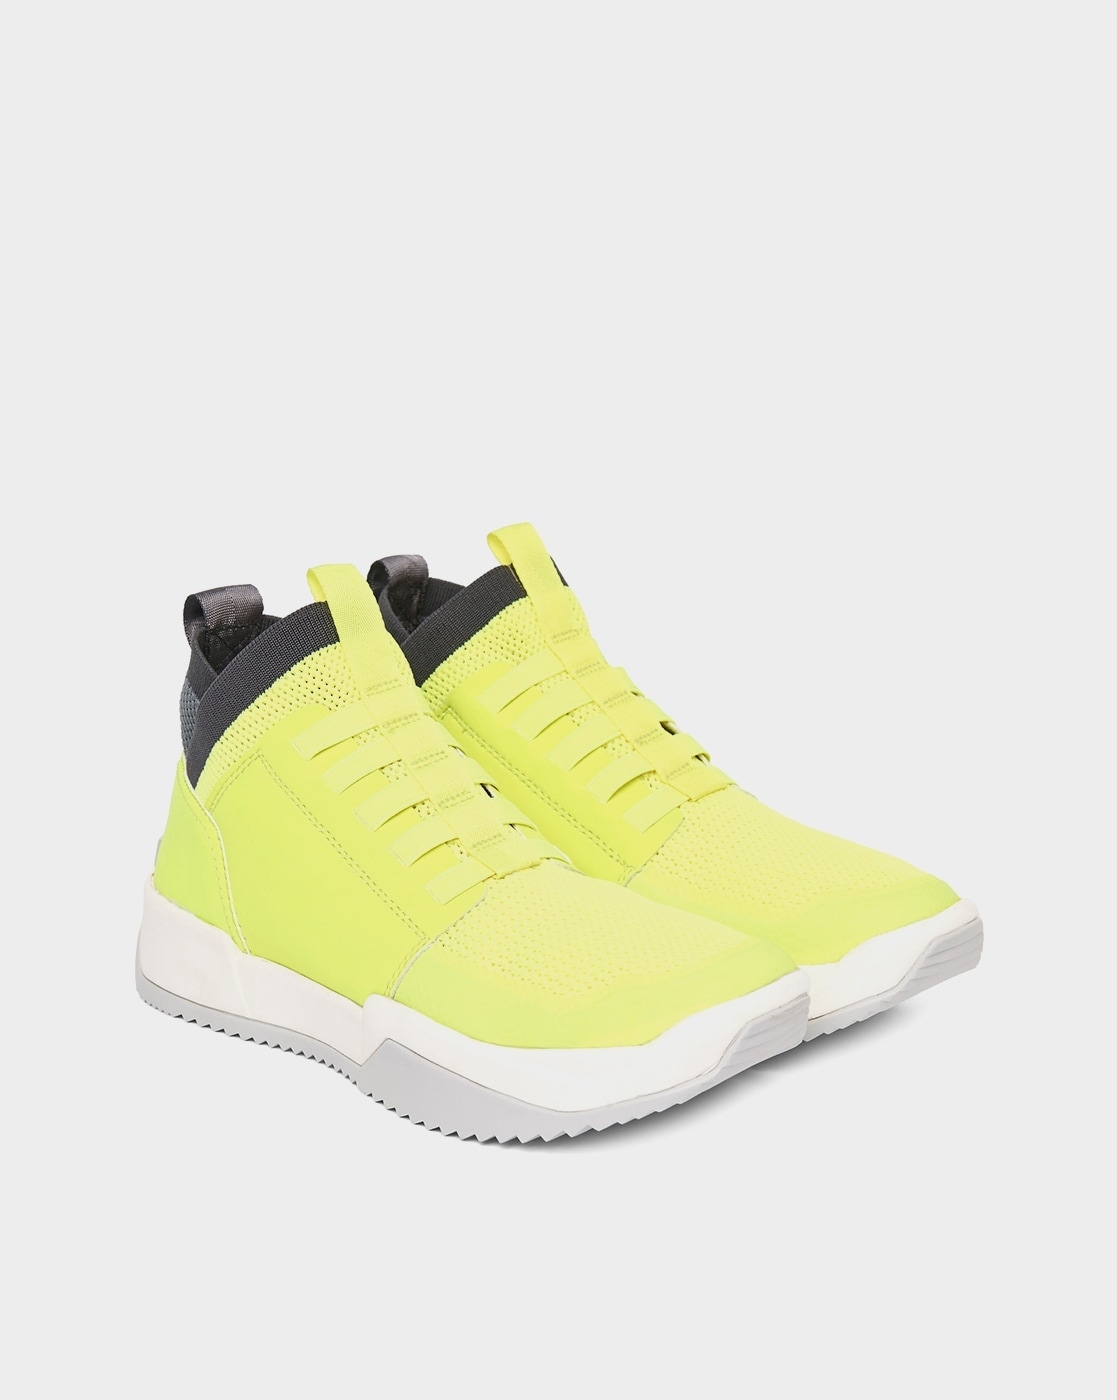 Adidas Energy Boost Athletic Neon Yellow Shoes G97558 Mens size 7.5 | eBay